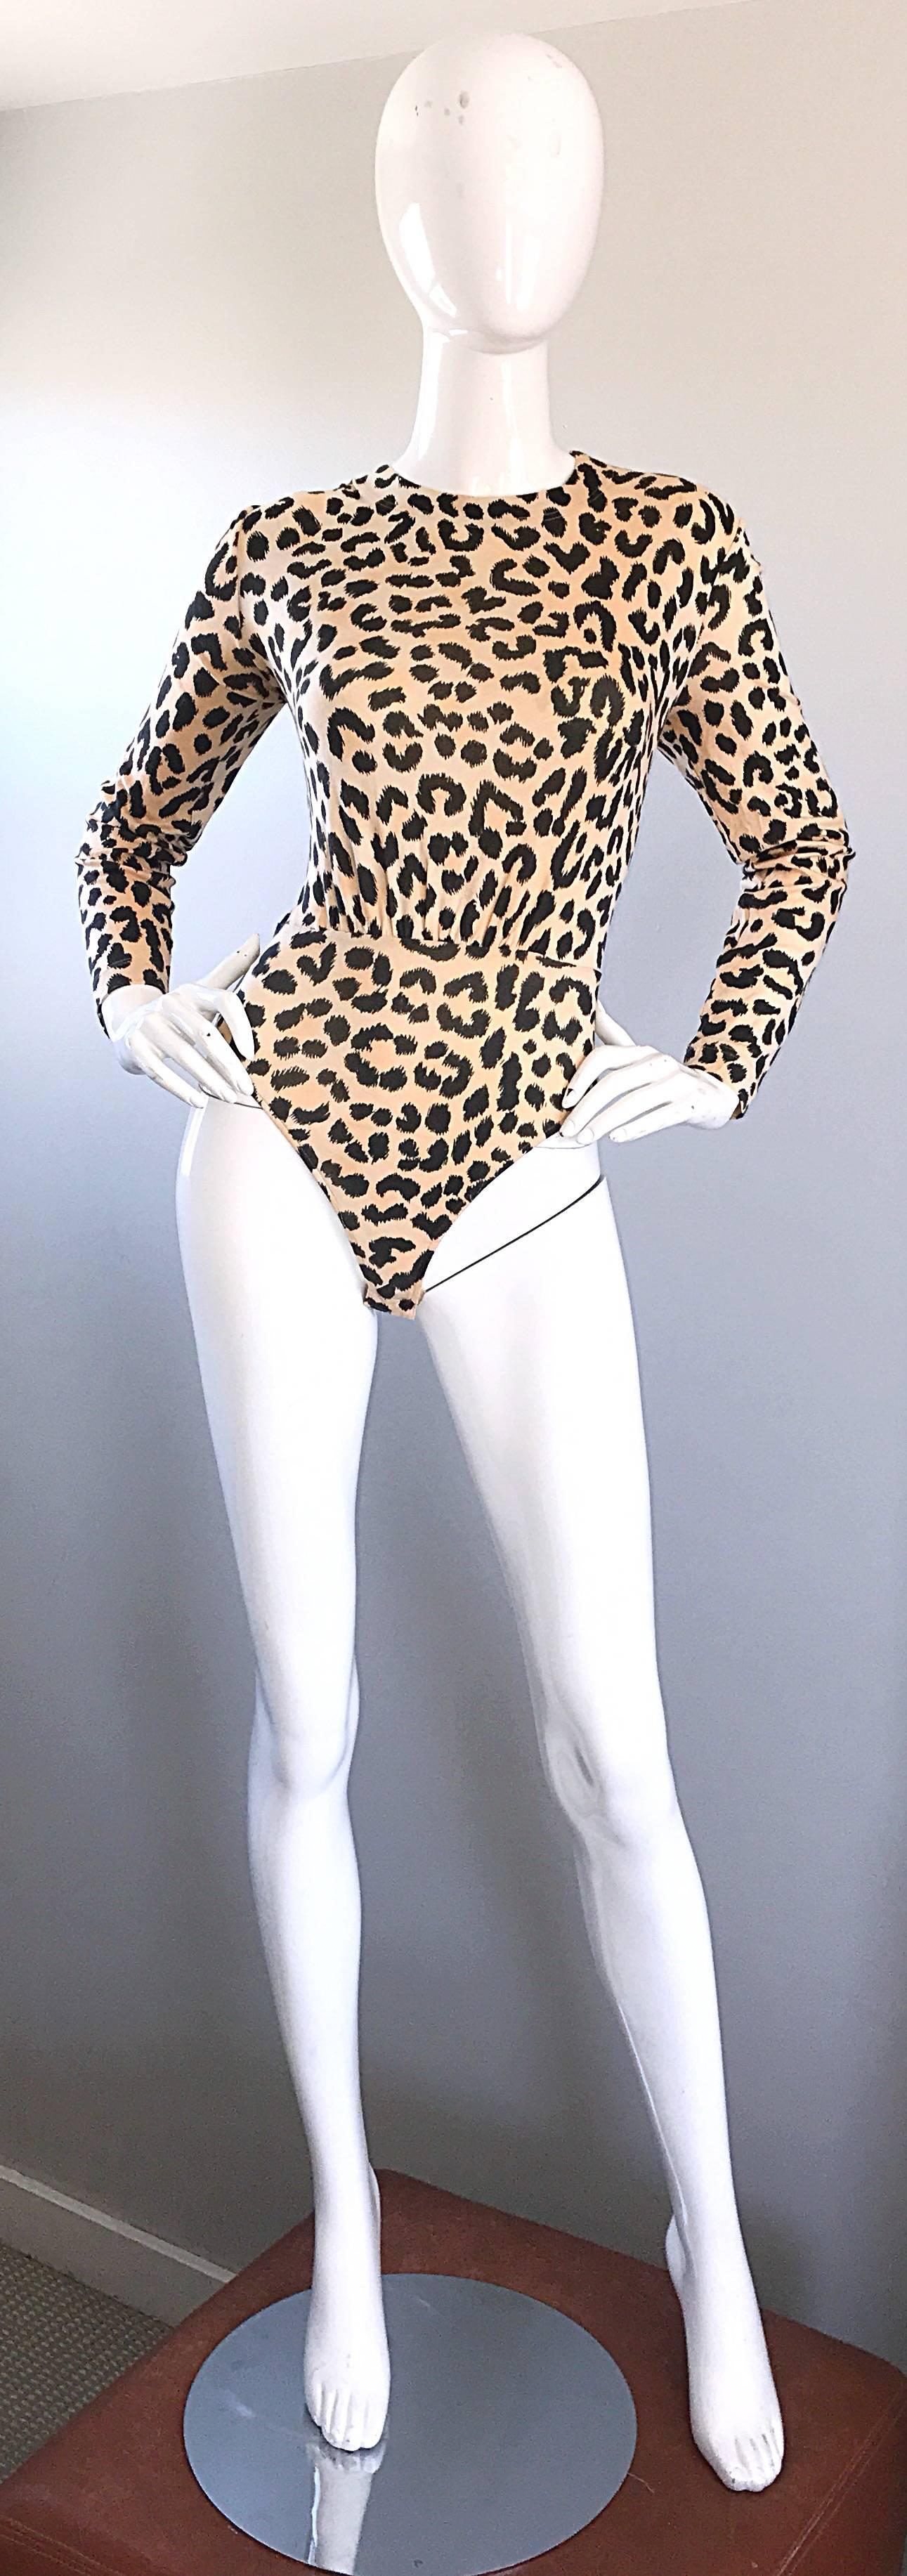 Sexy 1990s ESCADA by MARGARETHA LEY leopard/cheetah animal print long sleeve bodysuit! Body hugging cotton stretches to fit. Adjustable snaps at inner crotch. Hidden zipper up the back. Great with shorts, jeans, trousers, or a skirt. In great